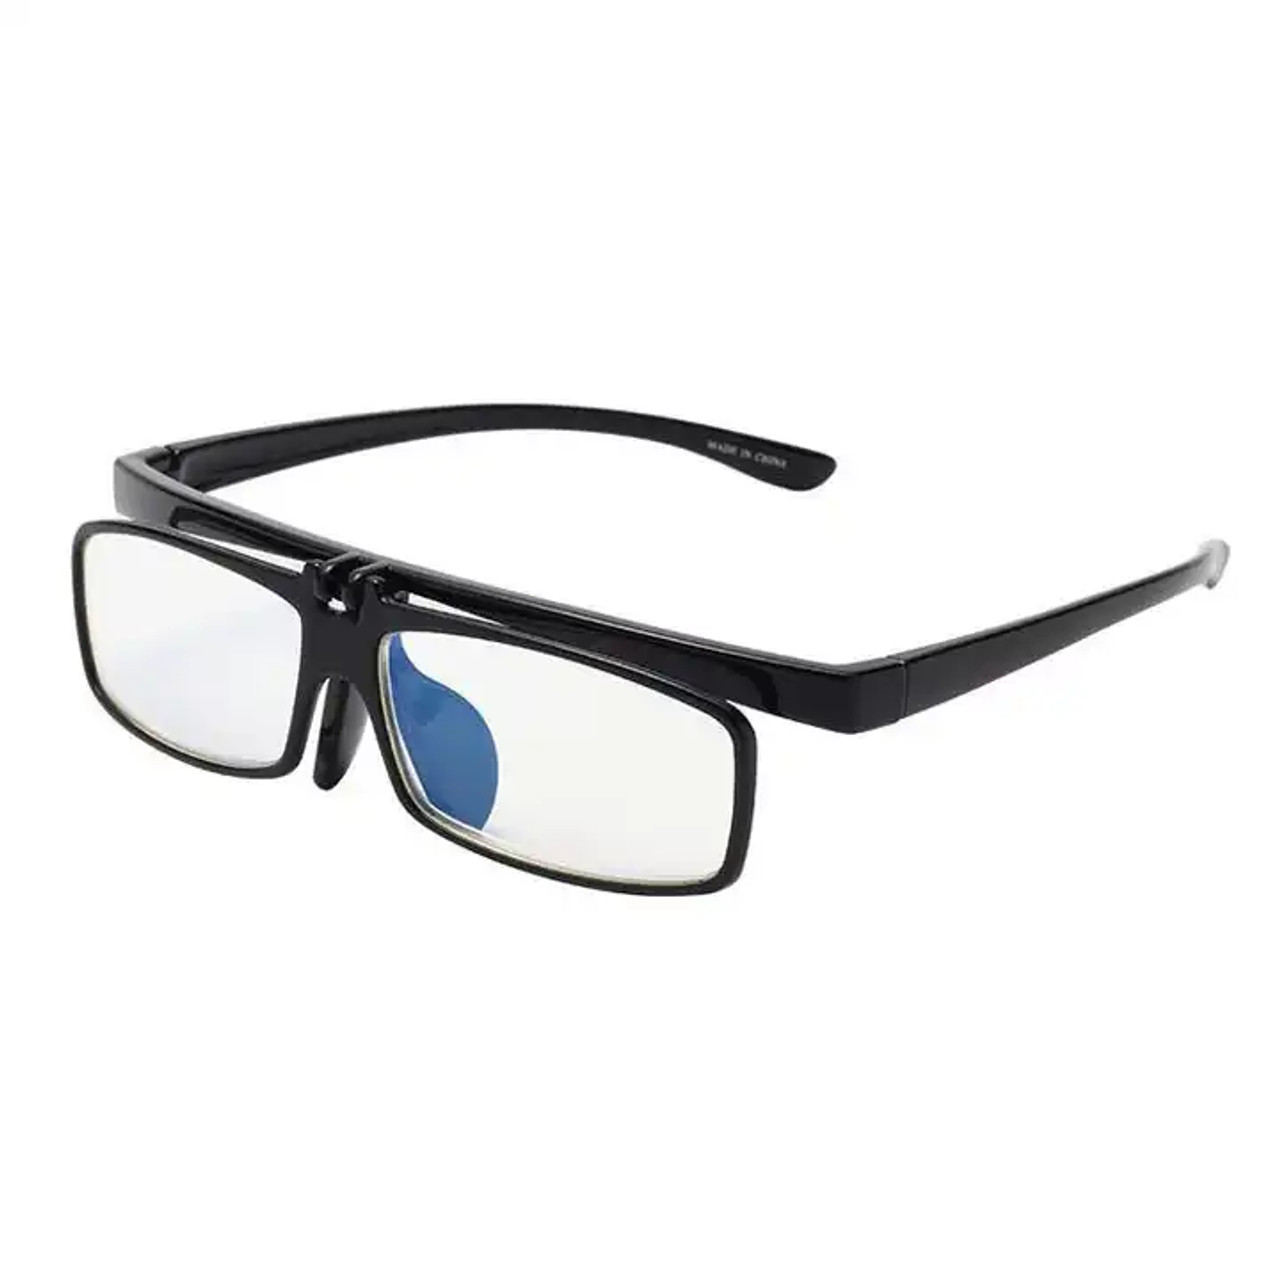 Retro Look Flip Up / Down Readers Reading Magnifying Glasses with UV  Protection